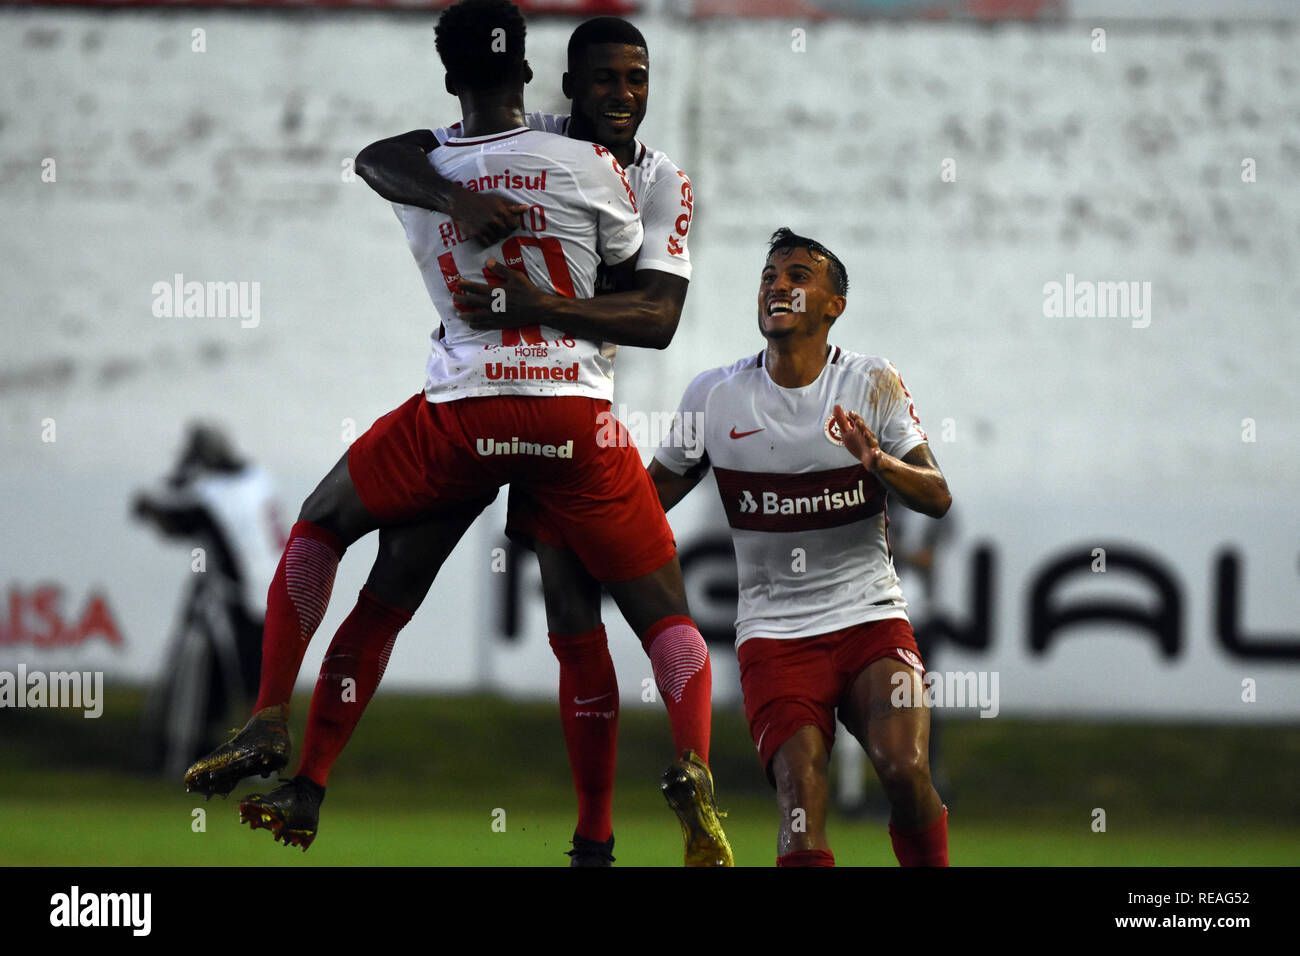 RS - Iju - 20/01/2019 - Gaucho 2019, S o Luiz x Internacional - Emerson Santos of Inter celebrates his goal with players of his team during a match against S o Luiz in the stadium October 19 for the state championship 2019. Foto: Renato Padilha / AGIF Stock Photo